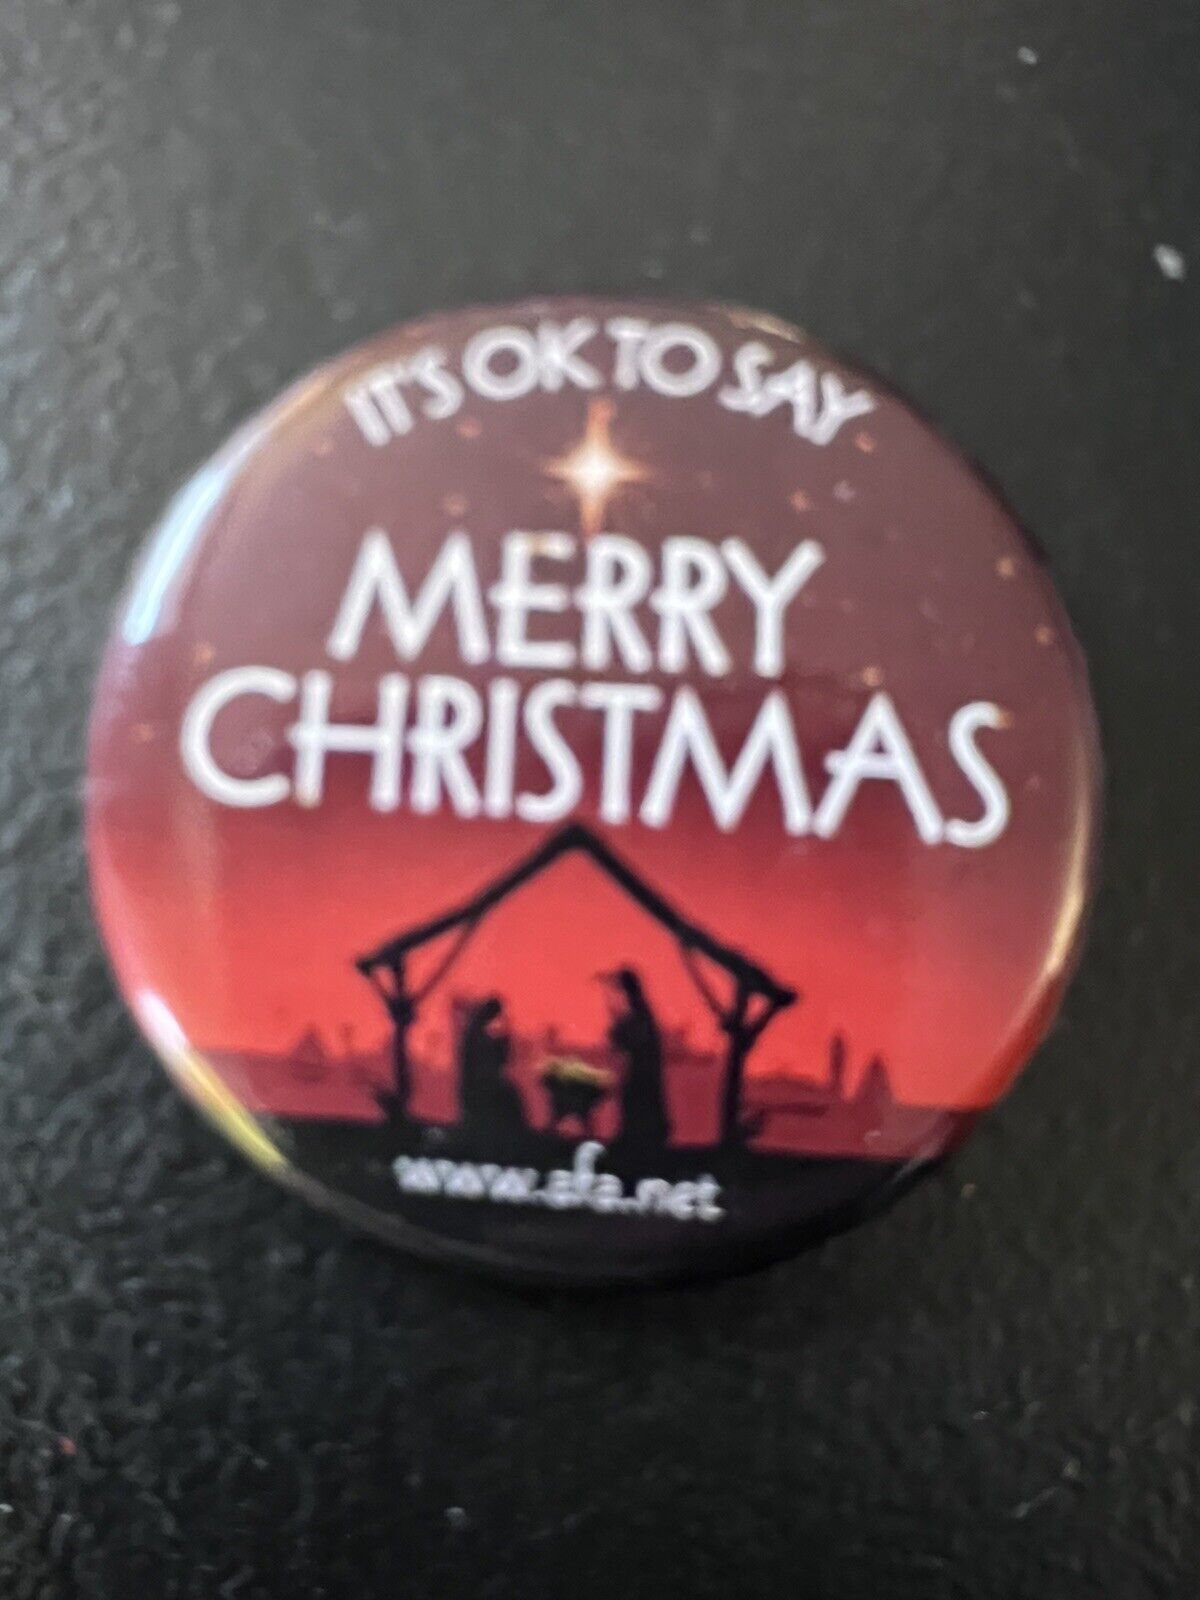 ITS OK TO SAY MERRY CHRISTMAS Pinback Button